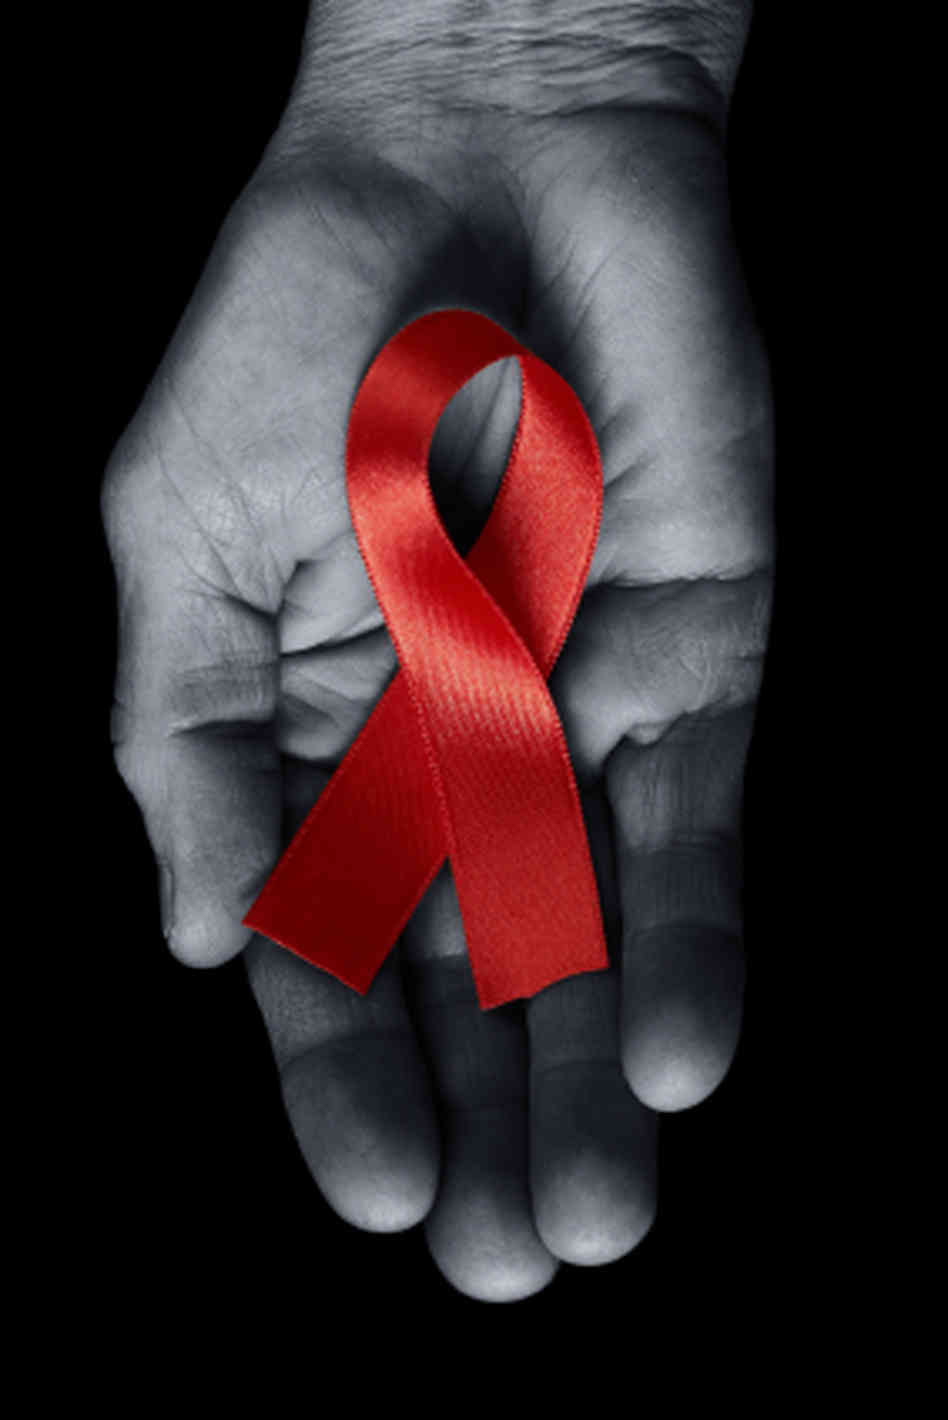 Read: 30 years with HIV – celebrating life